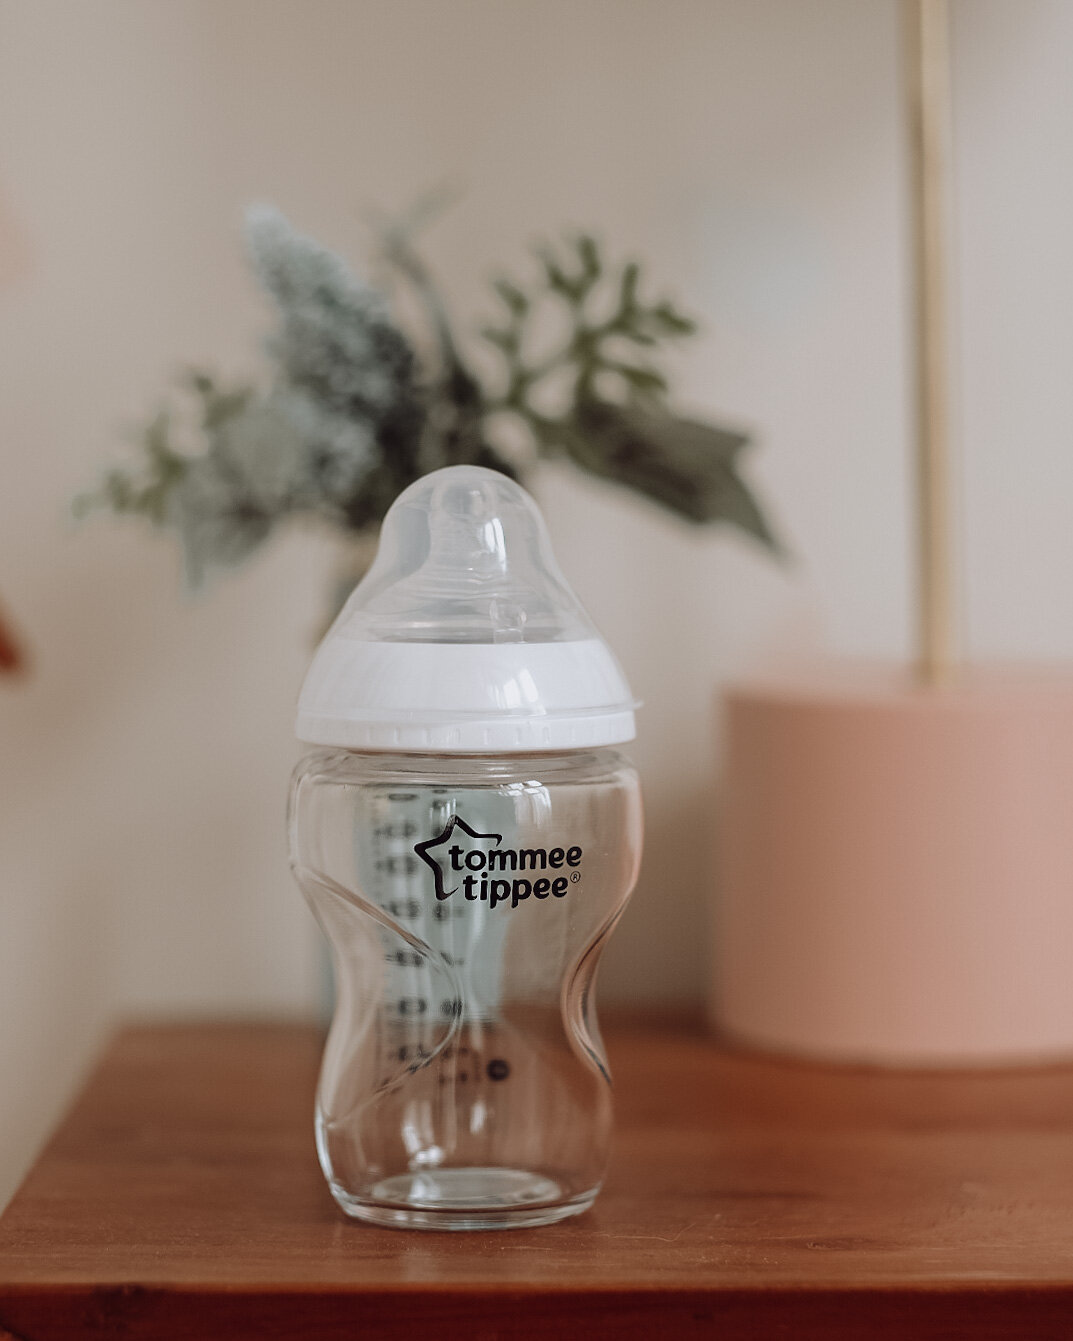 Tommee Tippee Closer to Nature Bottle. — Sheridan Ingalls